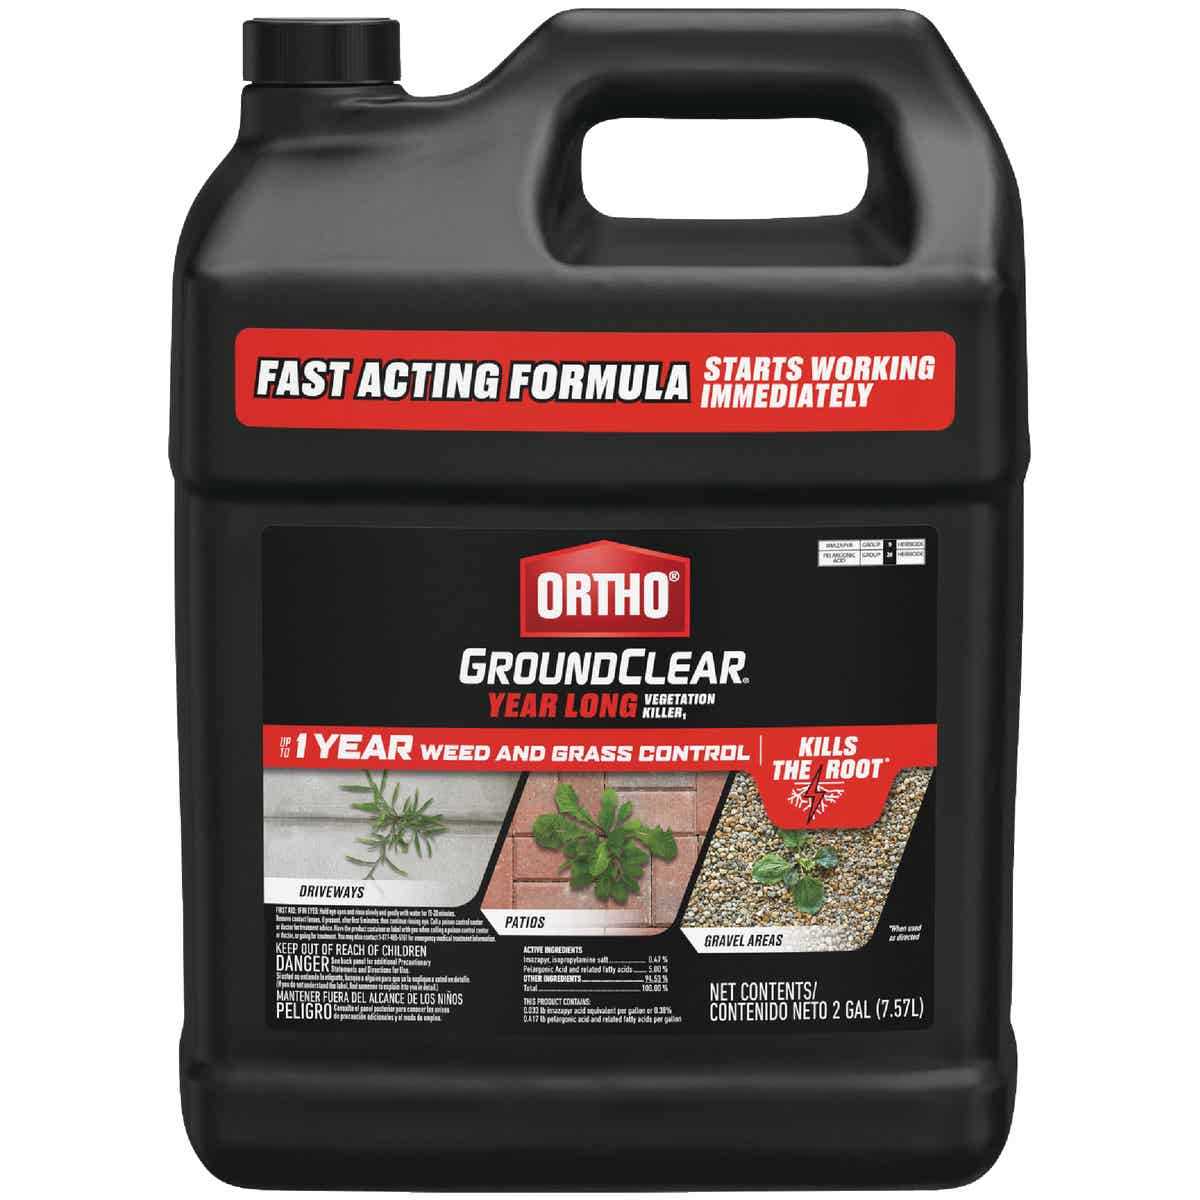 Why Ortho Ground Clear is the Best Weed Control Product